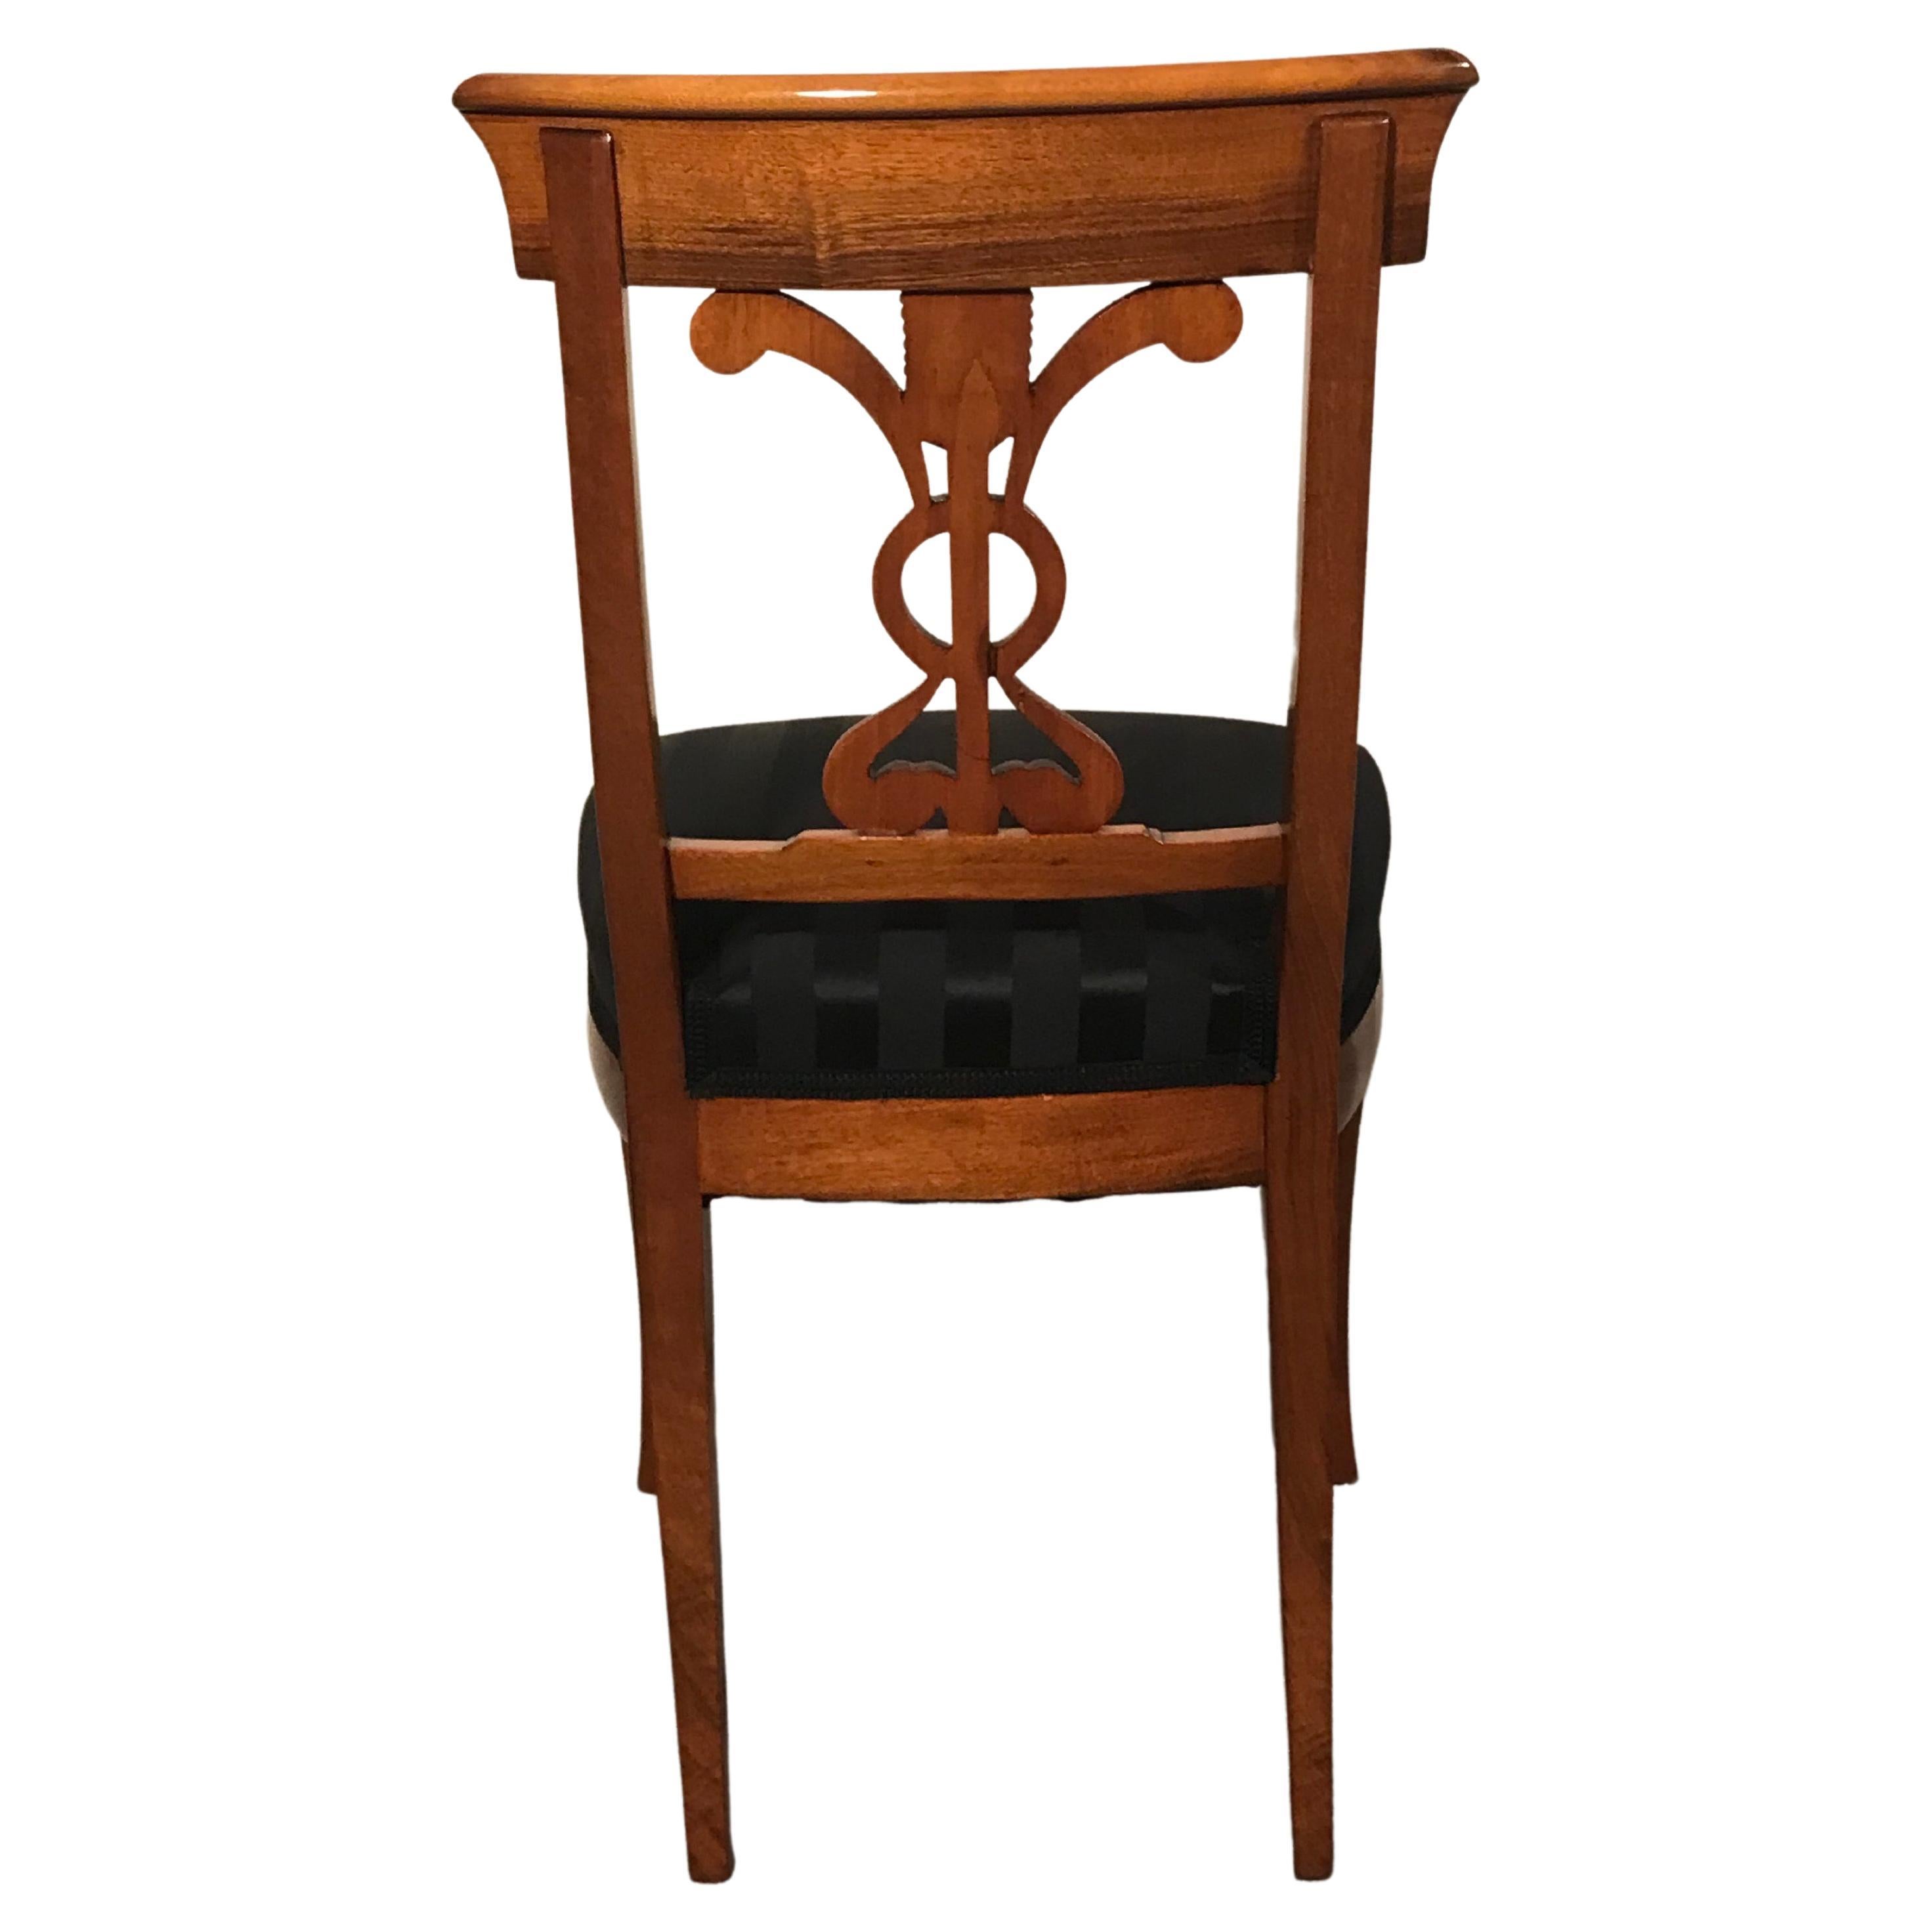 This set of 6 Biedermeier dining chairs has a pretty walnut veneer. The chairs stand out for their gorgeous backrest decor. They come fully refinished with a shellac finish, new upholstery, and an elegant black JAB Anstoetz fabric. 

